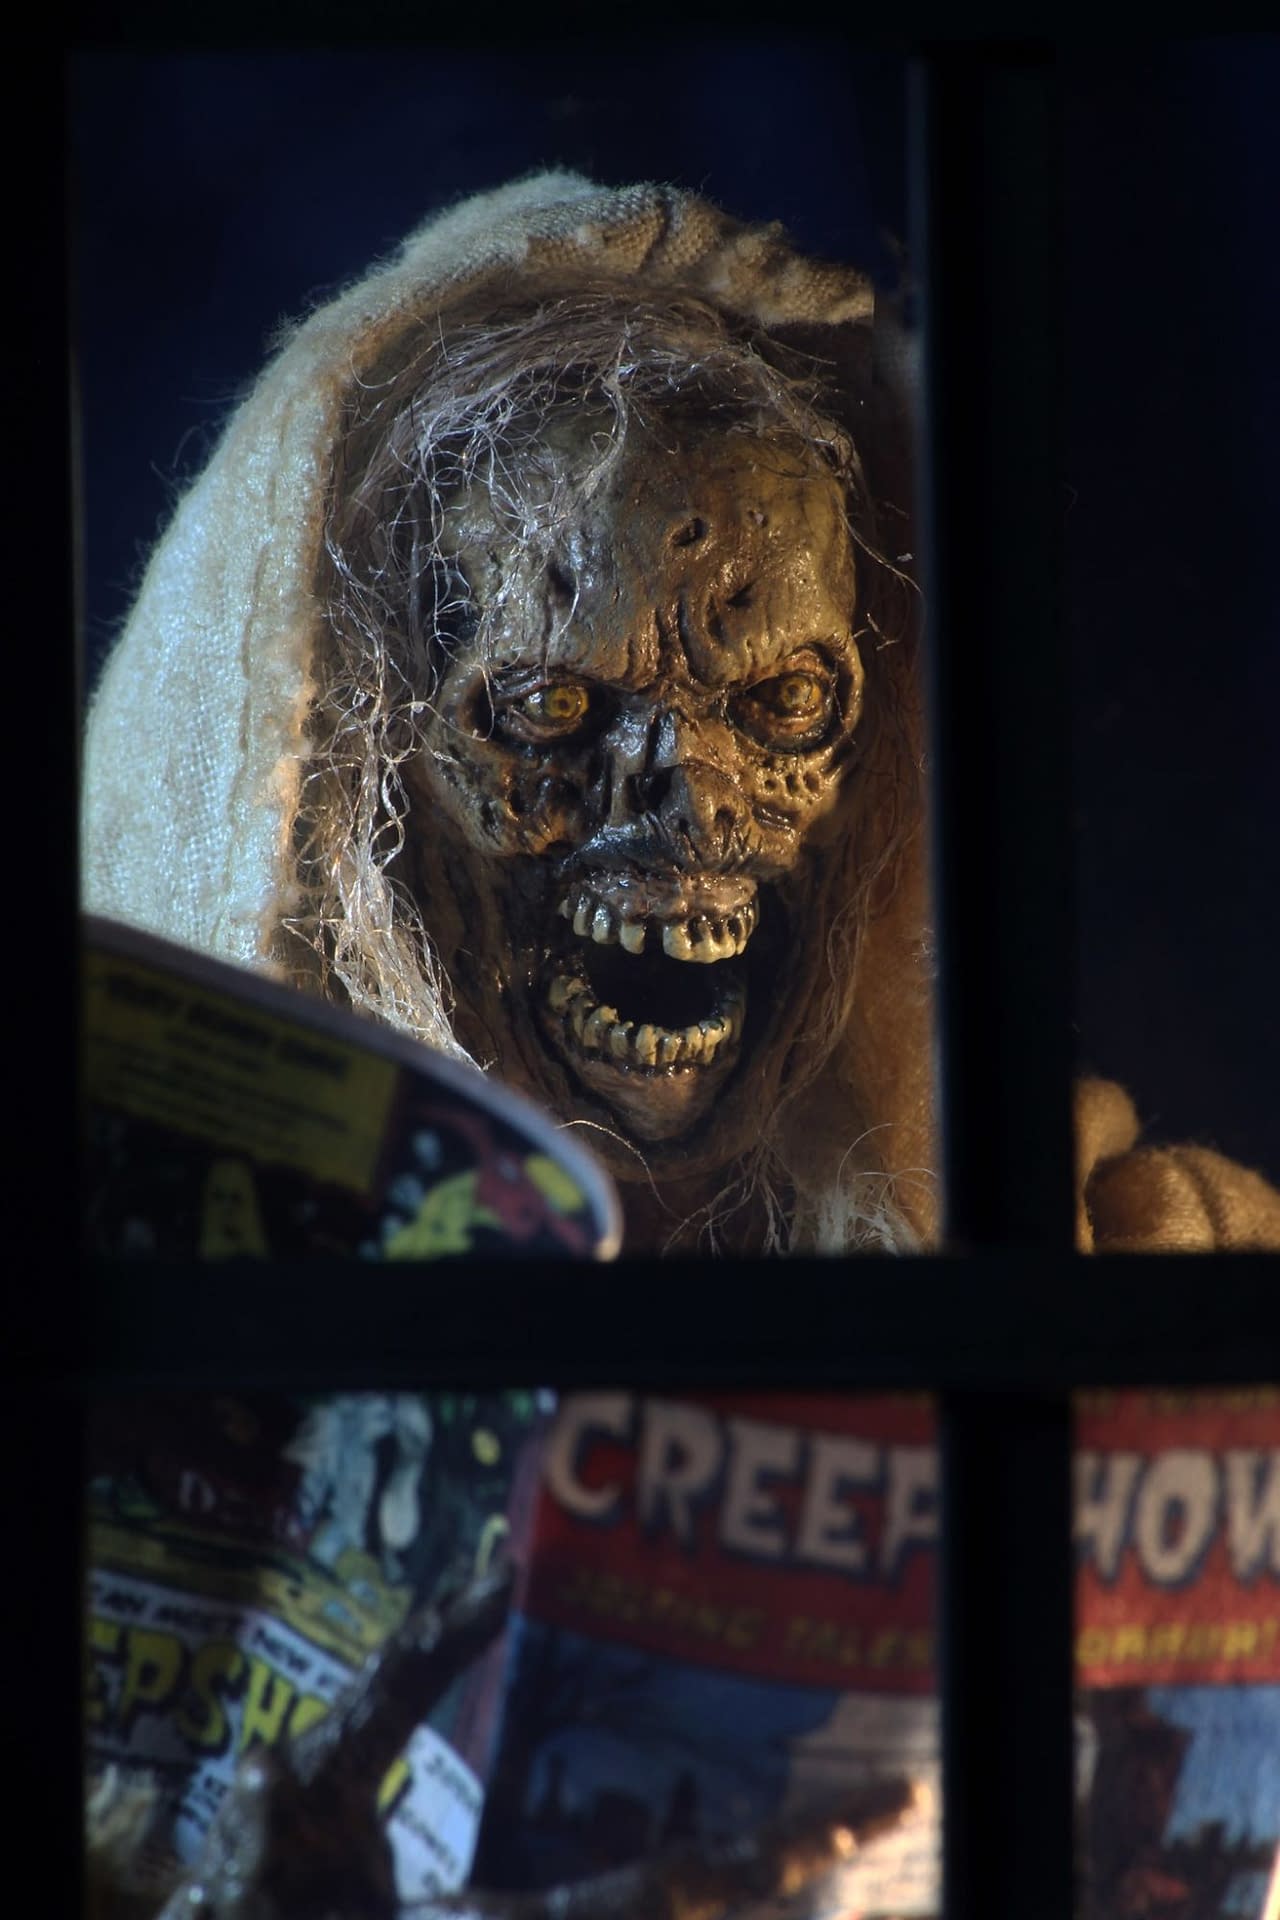 NECA brings "The Creepshow" Alive with New Figure